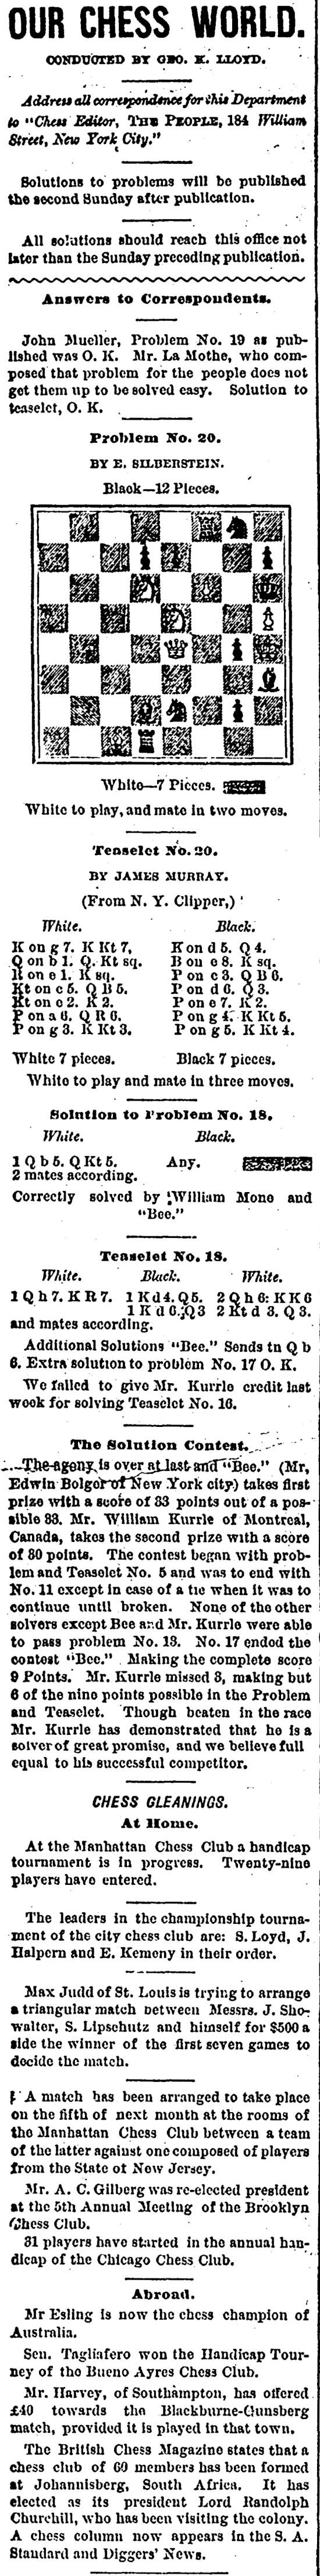 1891.10.25-01 New York People.png